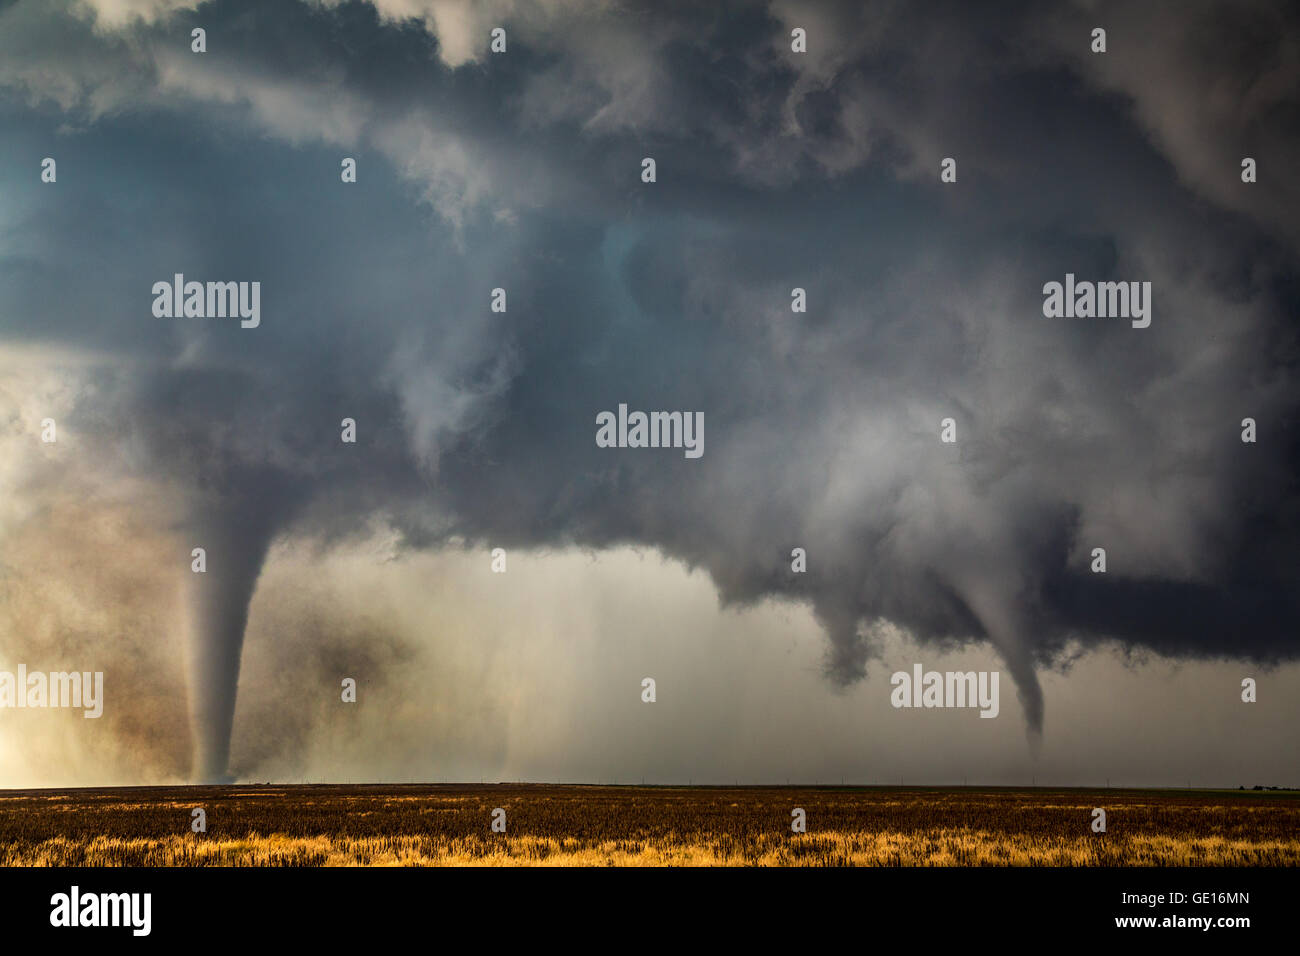 Two tornadoes descend from a supercell near Dodge City, Kansas, May 24, 2016.  These tornadoes were two of 15 tornadoes this storm produced. Stock Photo